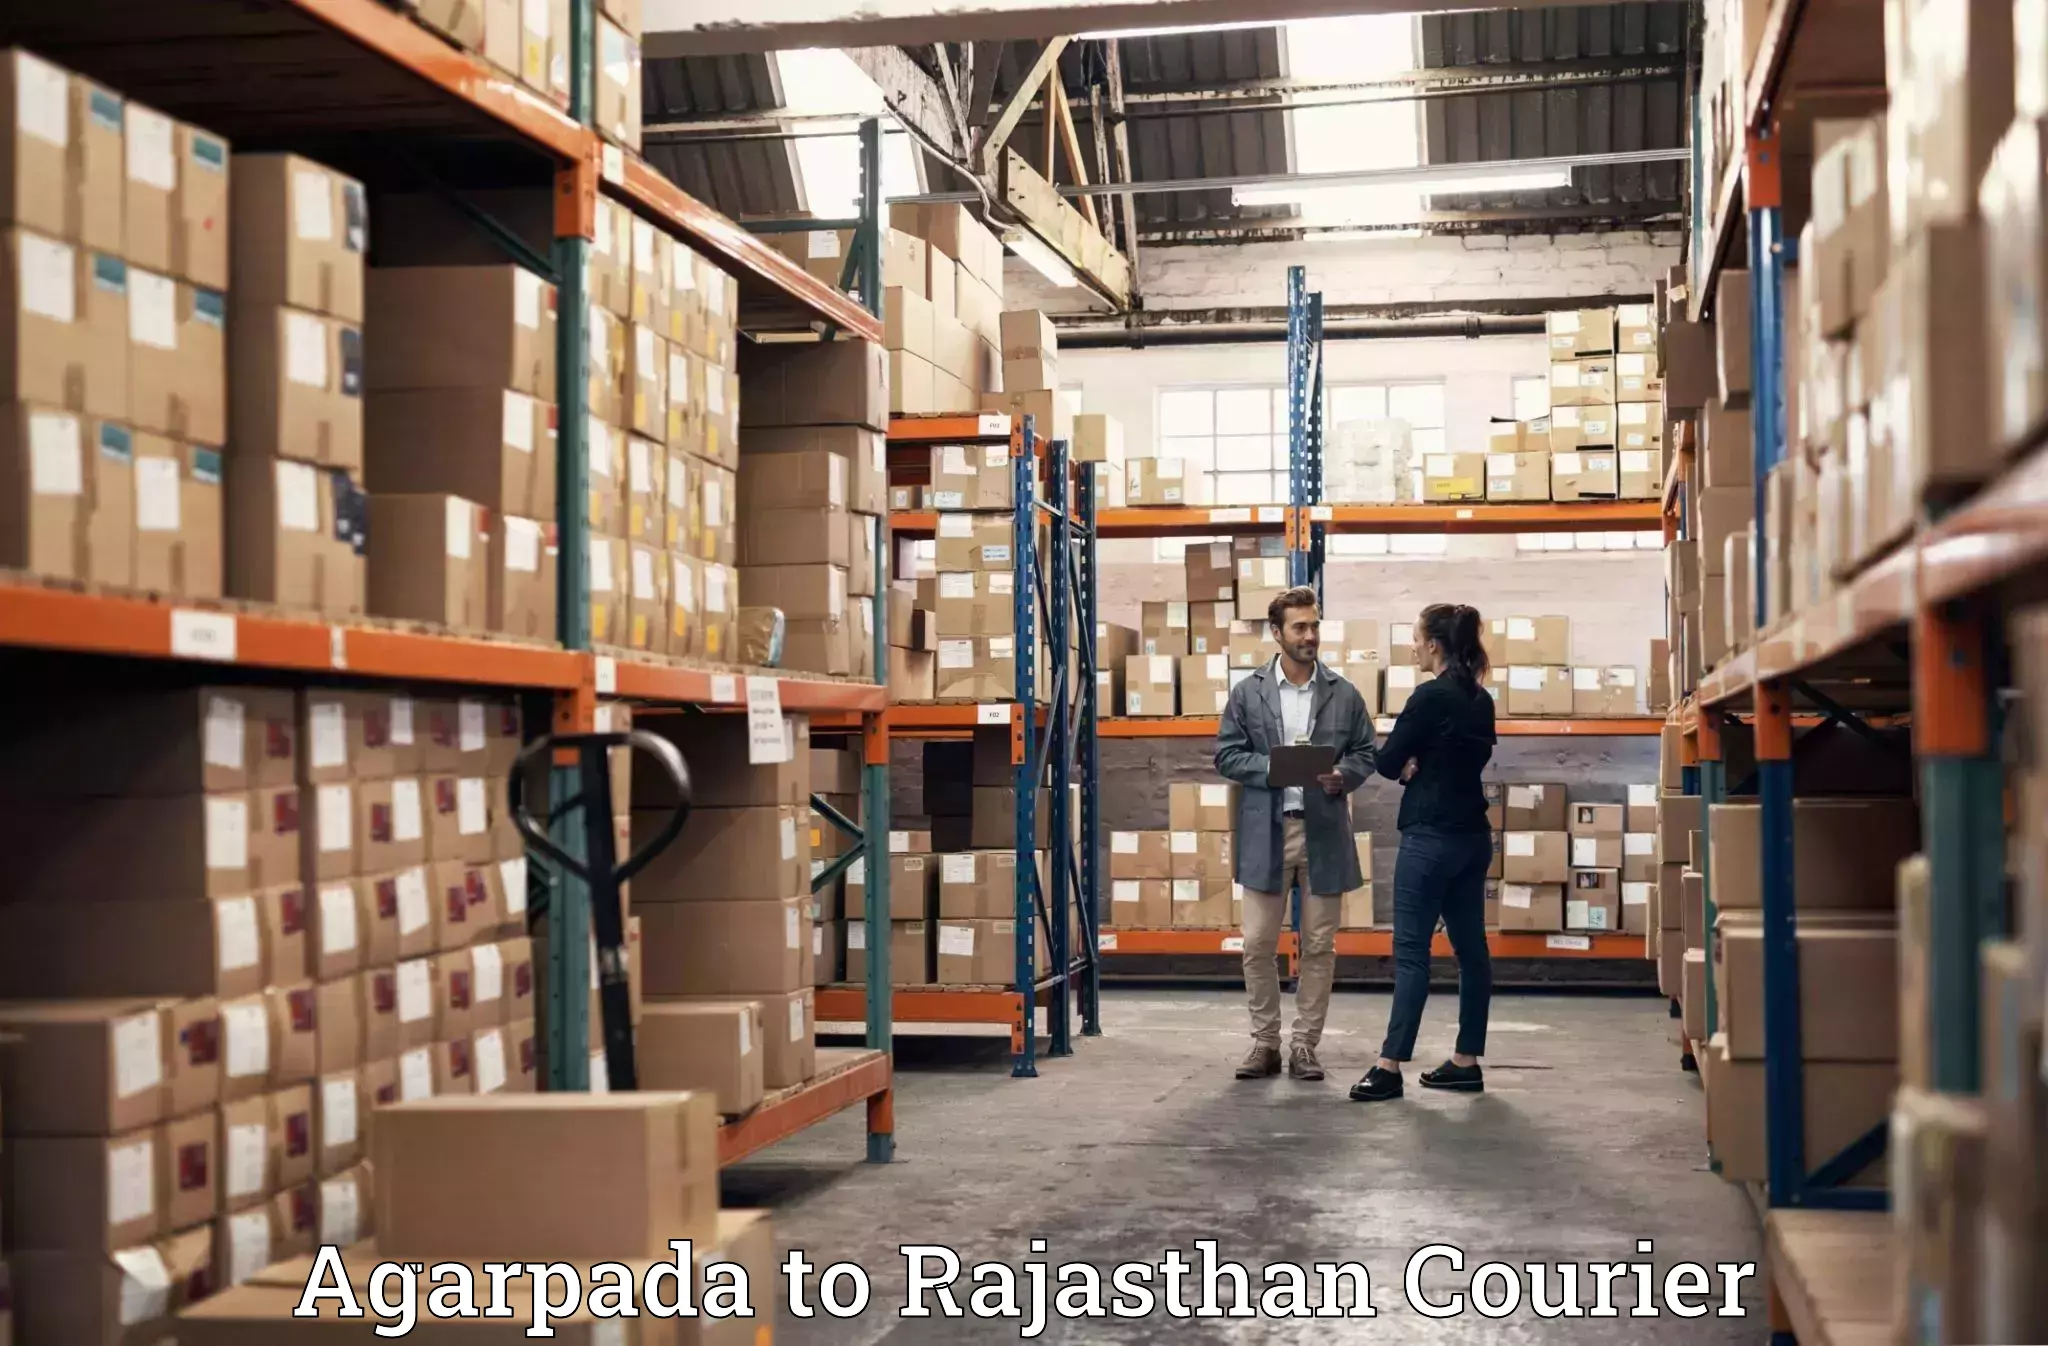 Trusted moving company Agarpada to Rajasthan